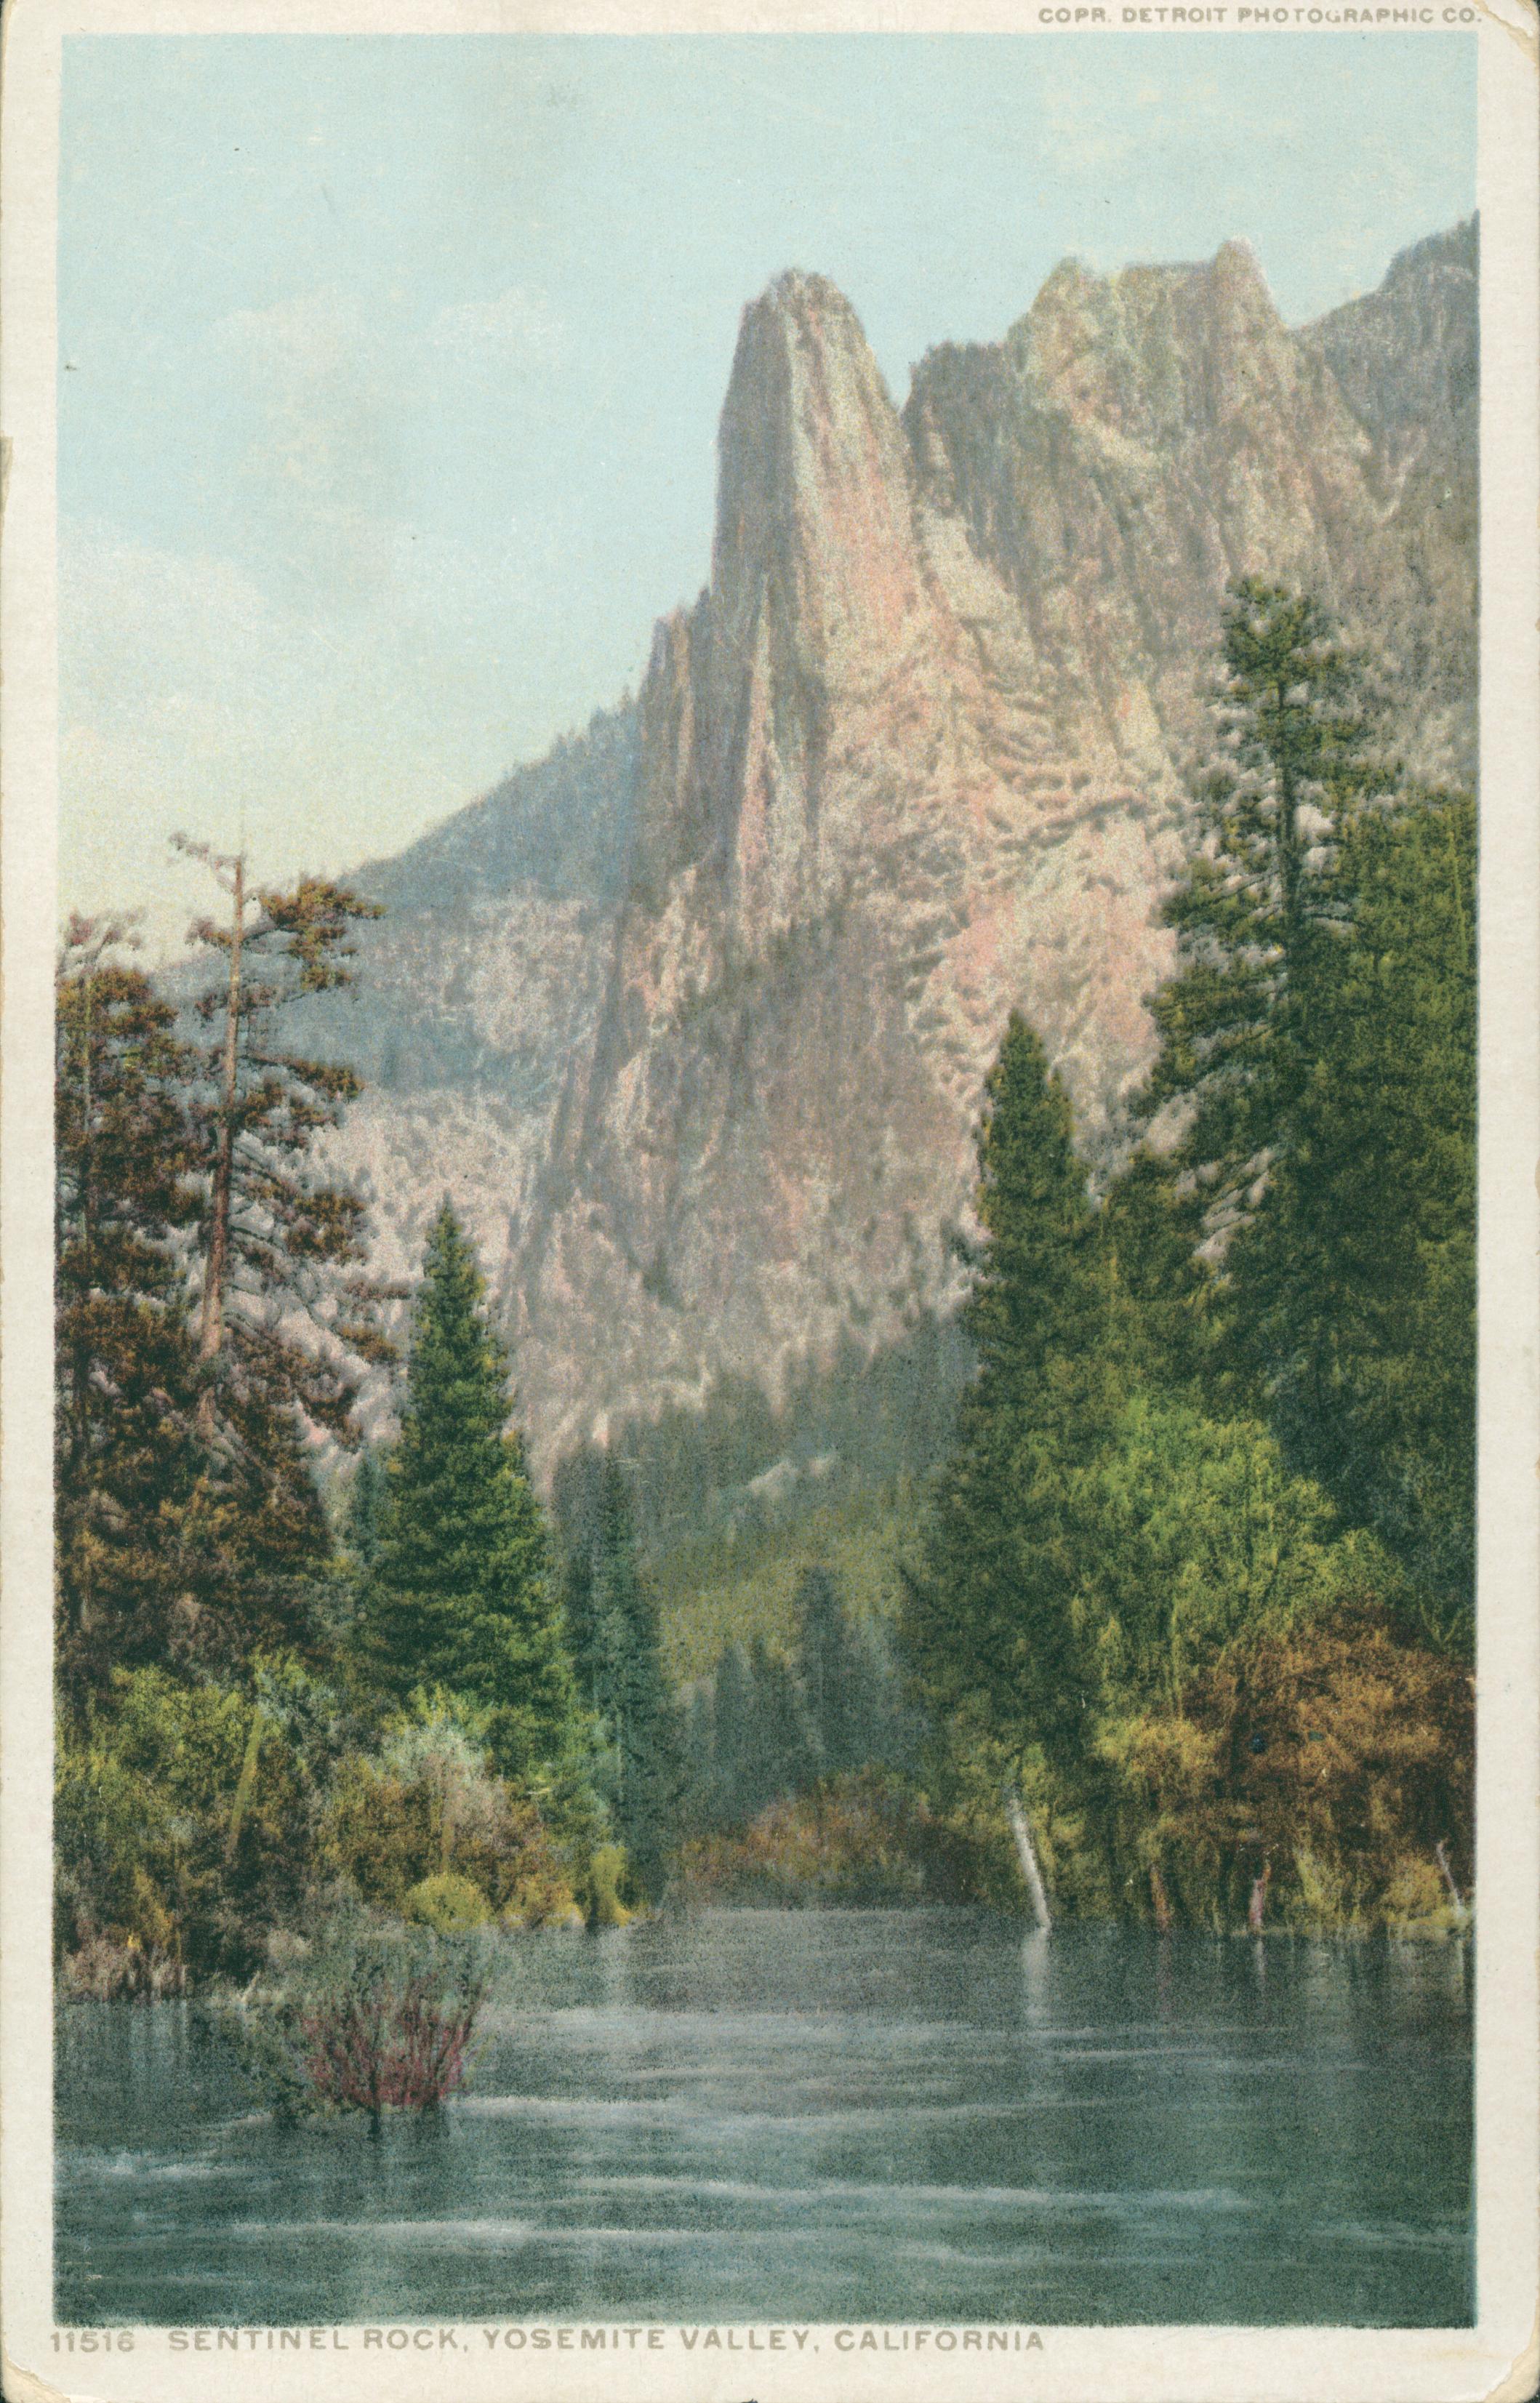 Shows Sentinel Rock looming above the Merced River